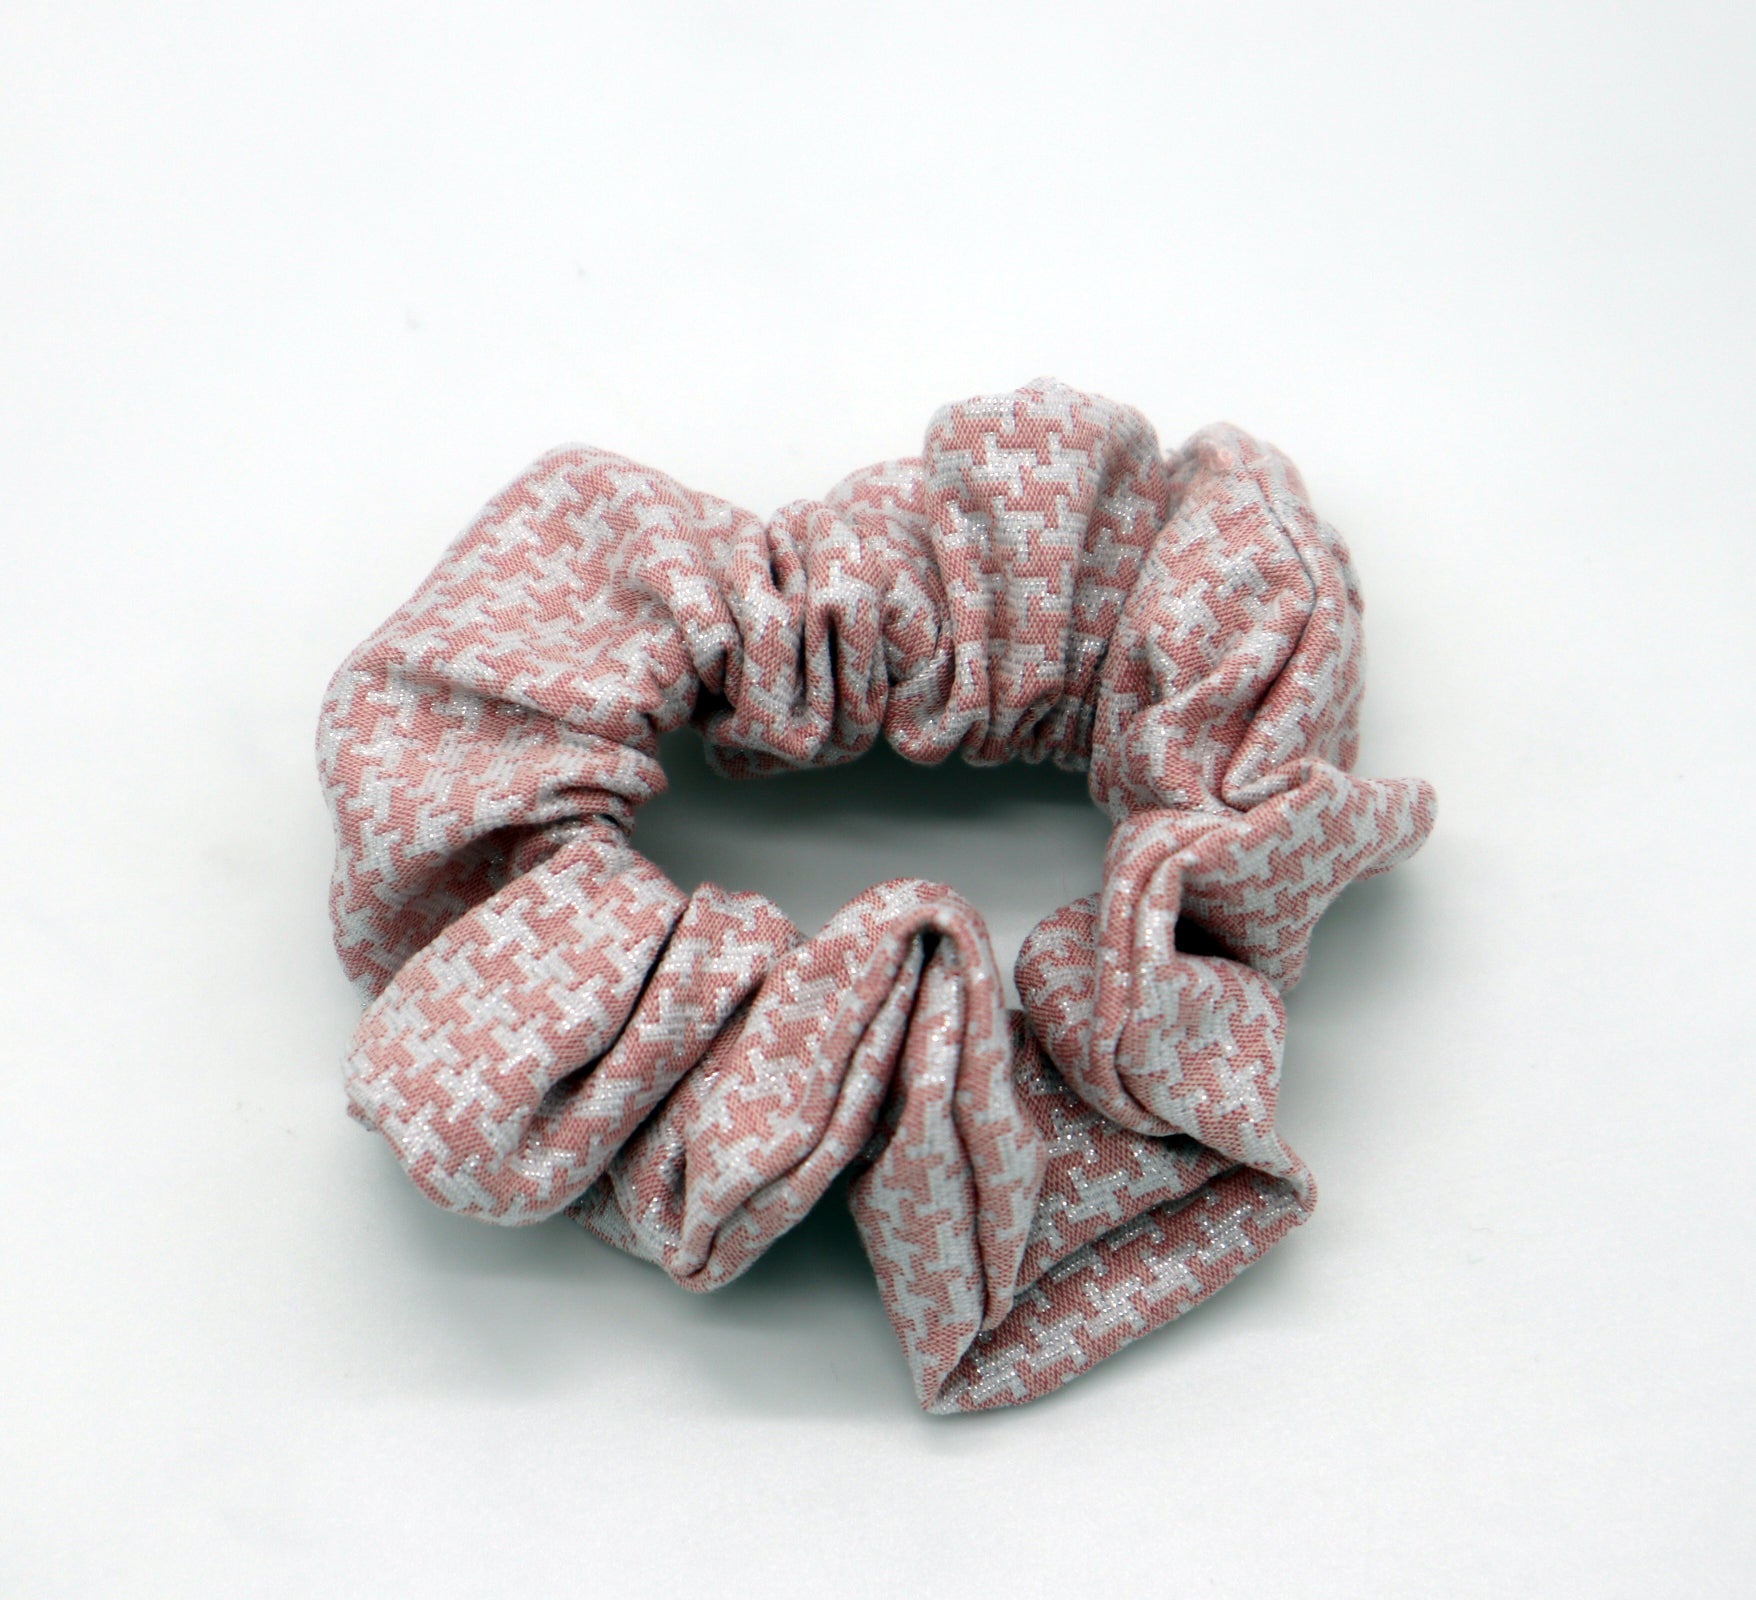 The Popping Candy pink scrunchie